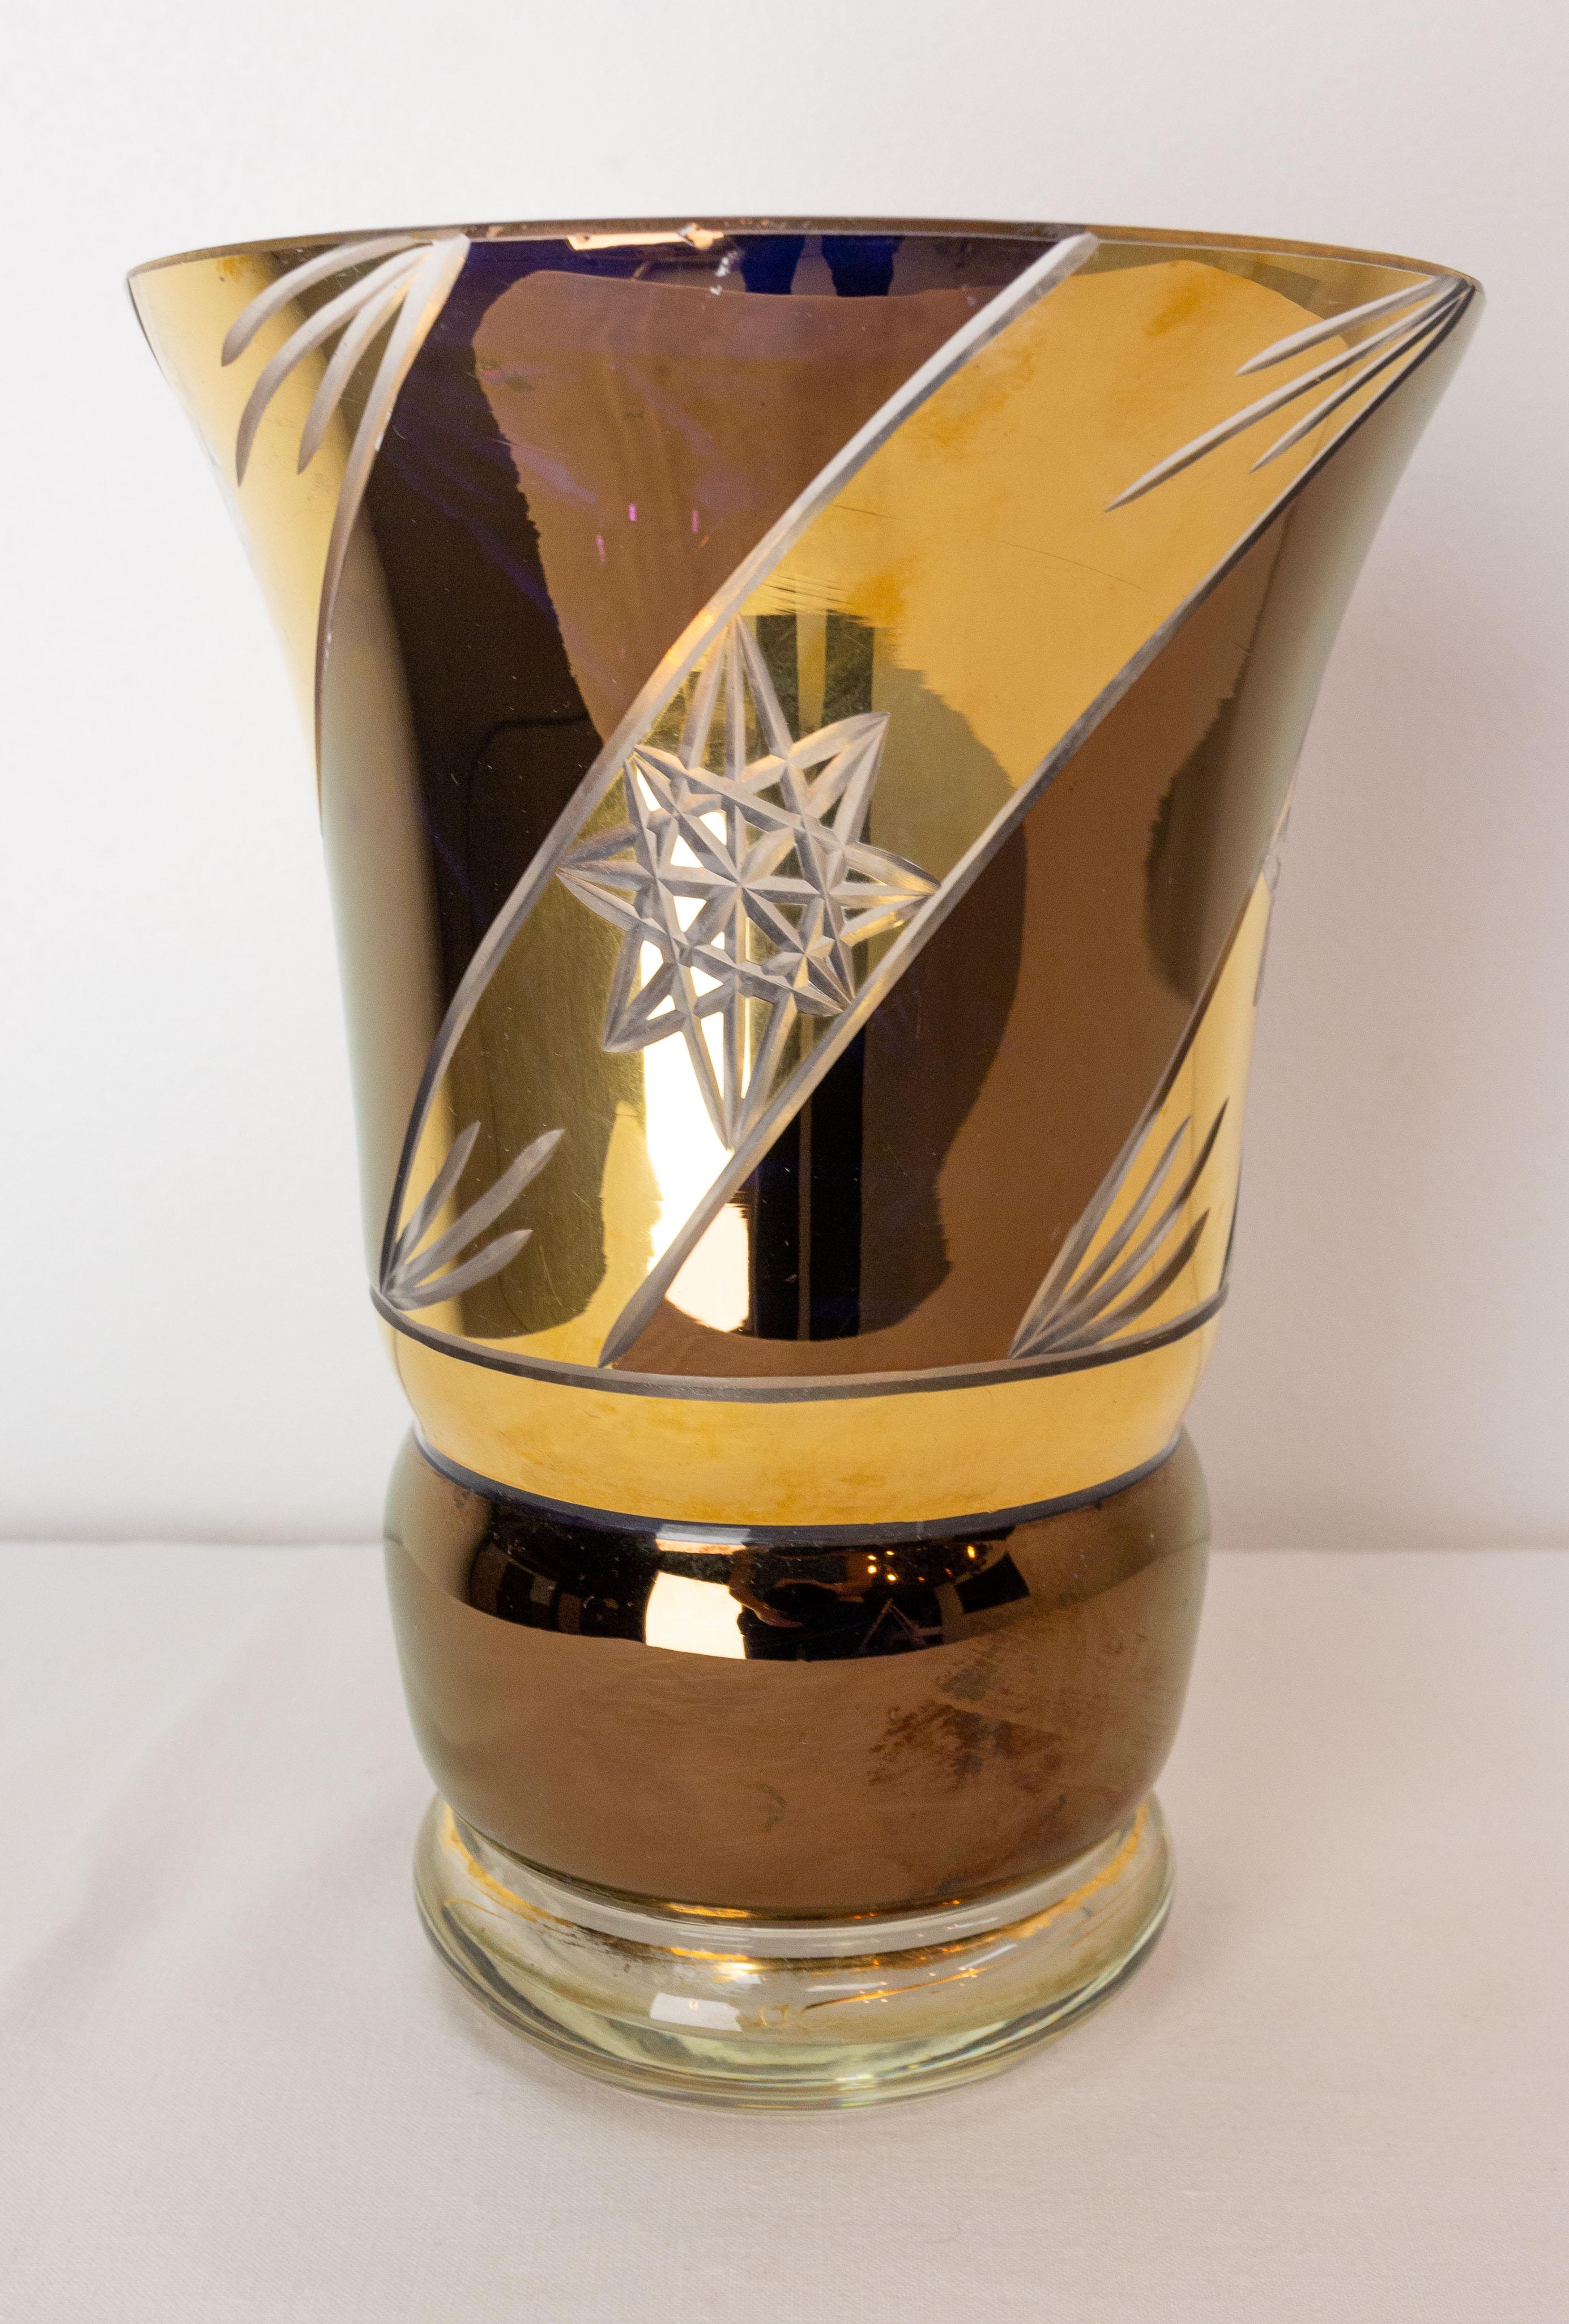 Vintage vase typical of the sixties.
Bronzed and gilded glass with engraved stars.
French circa 1960
Good vintage condition, with usual signs of use and a discolored little part (please see photos).

Shipping:
Diam 15 H 20.5 cm 0.7 kg.